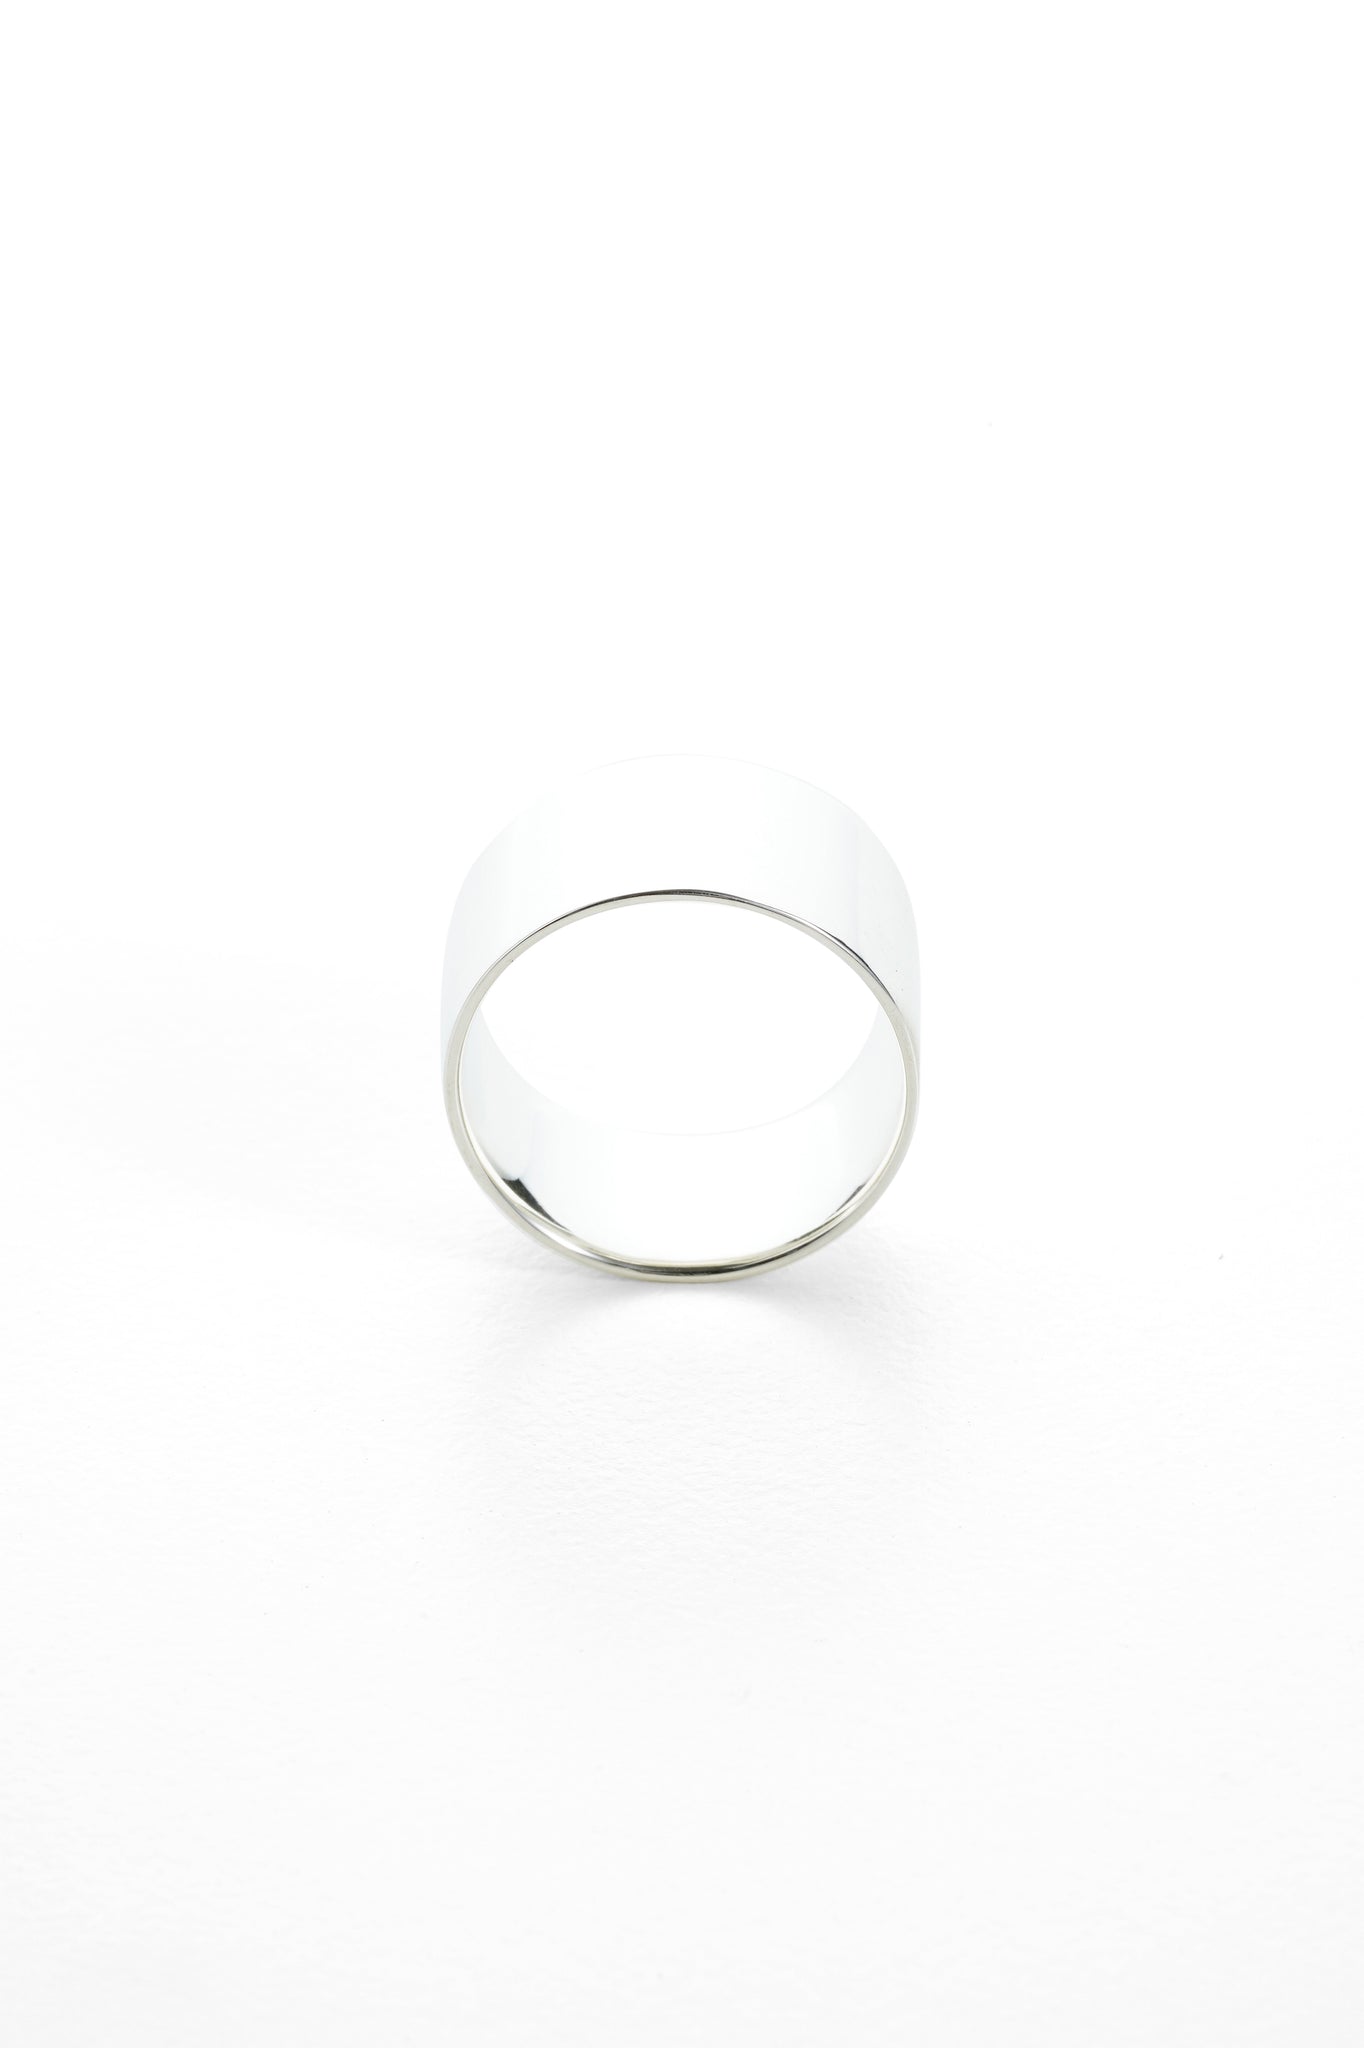 PT RING 03(SILVER925)